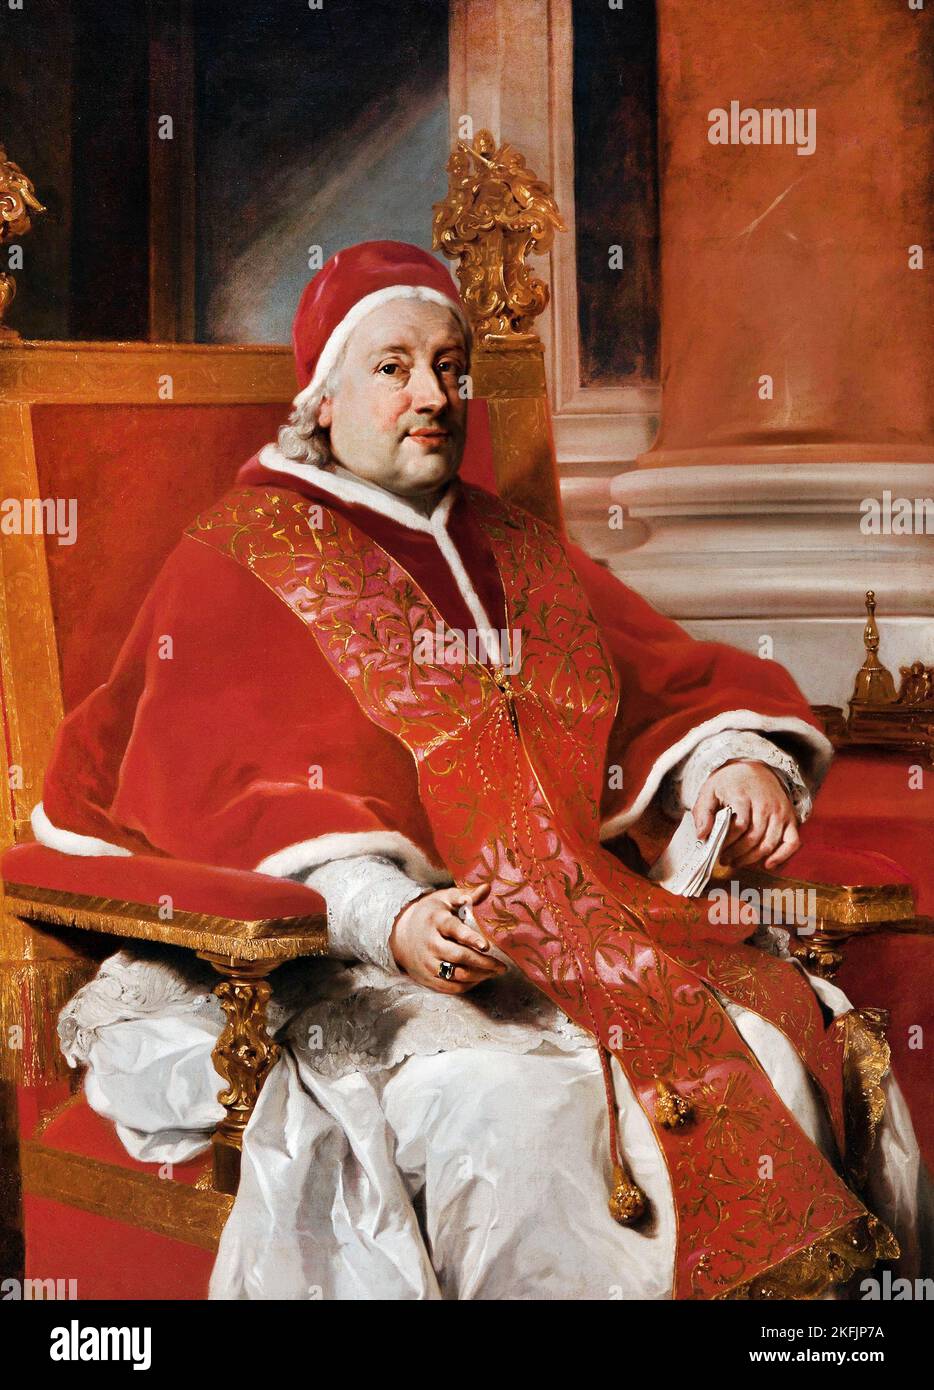 Anton Raphael Mengs; Portrait of pope Clement XIII; Circa 1760; Oil on canvas; New Orleans Museum of Art, USA. Stock Photo